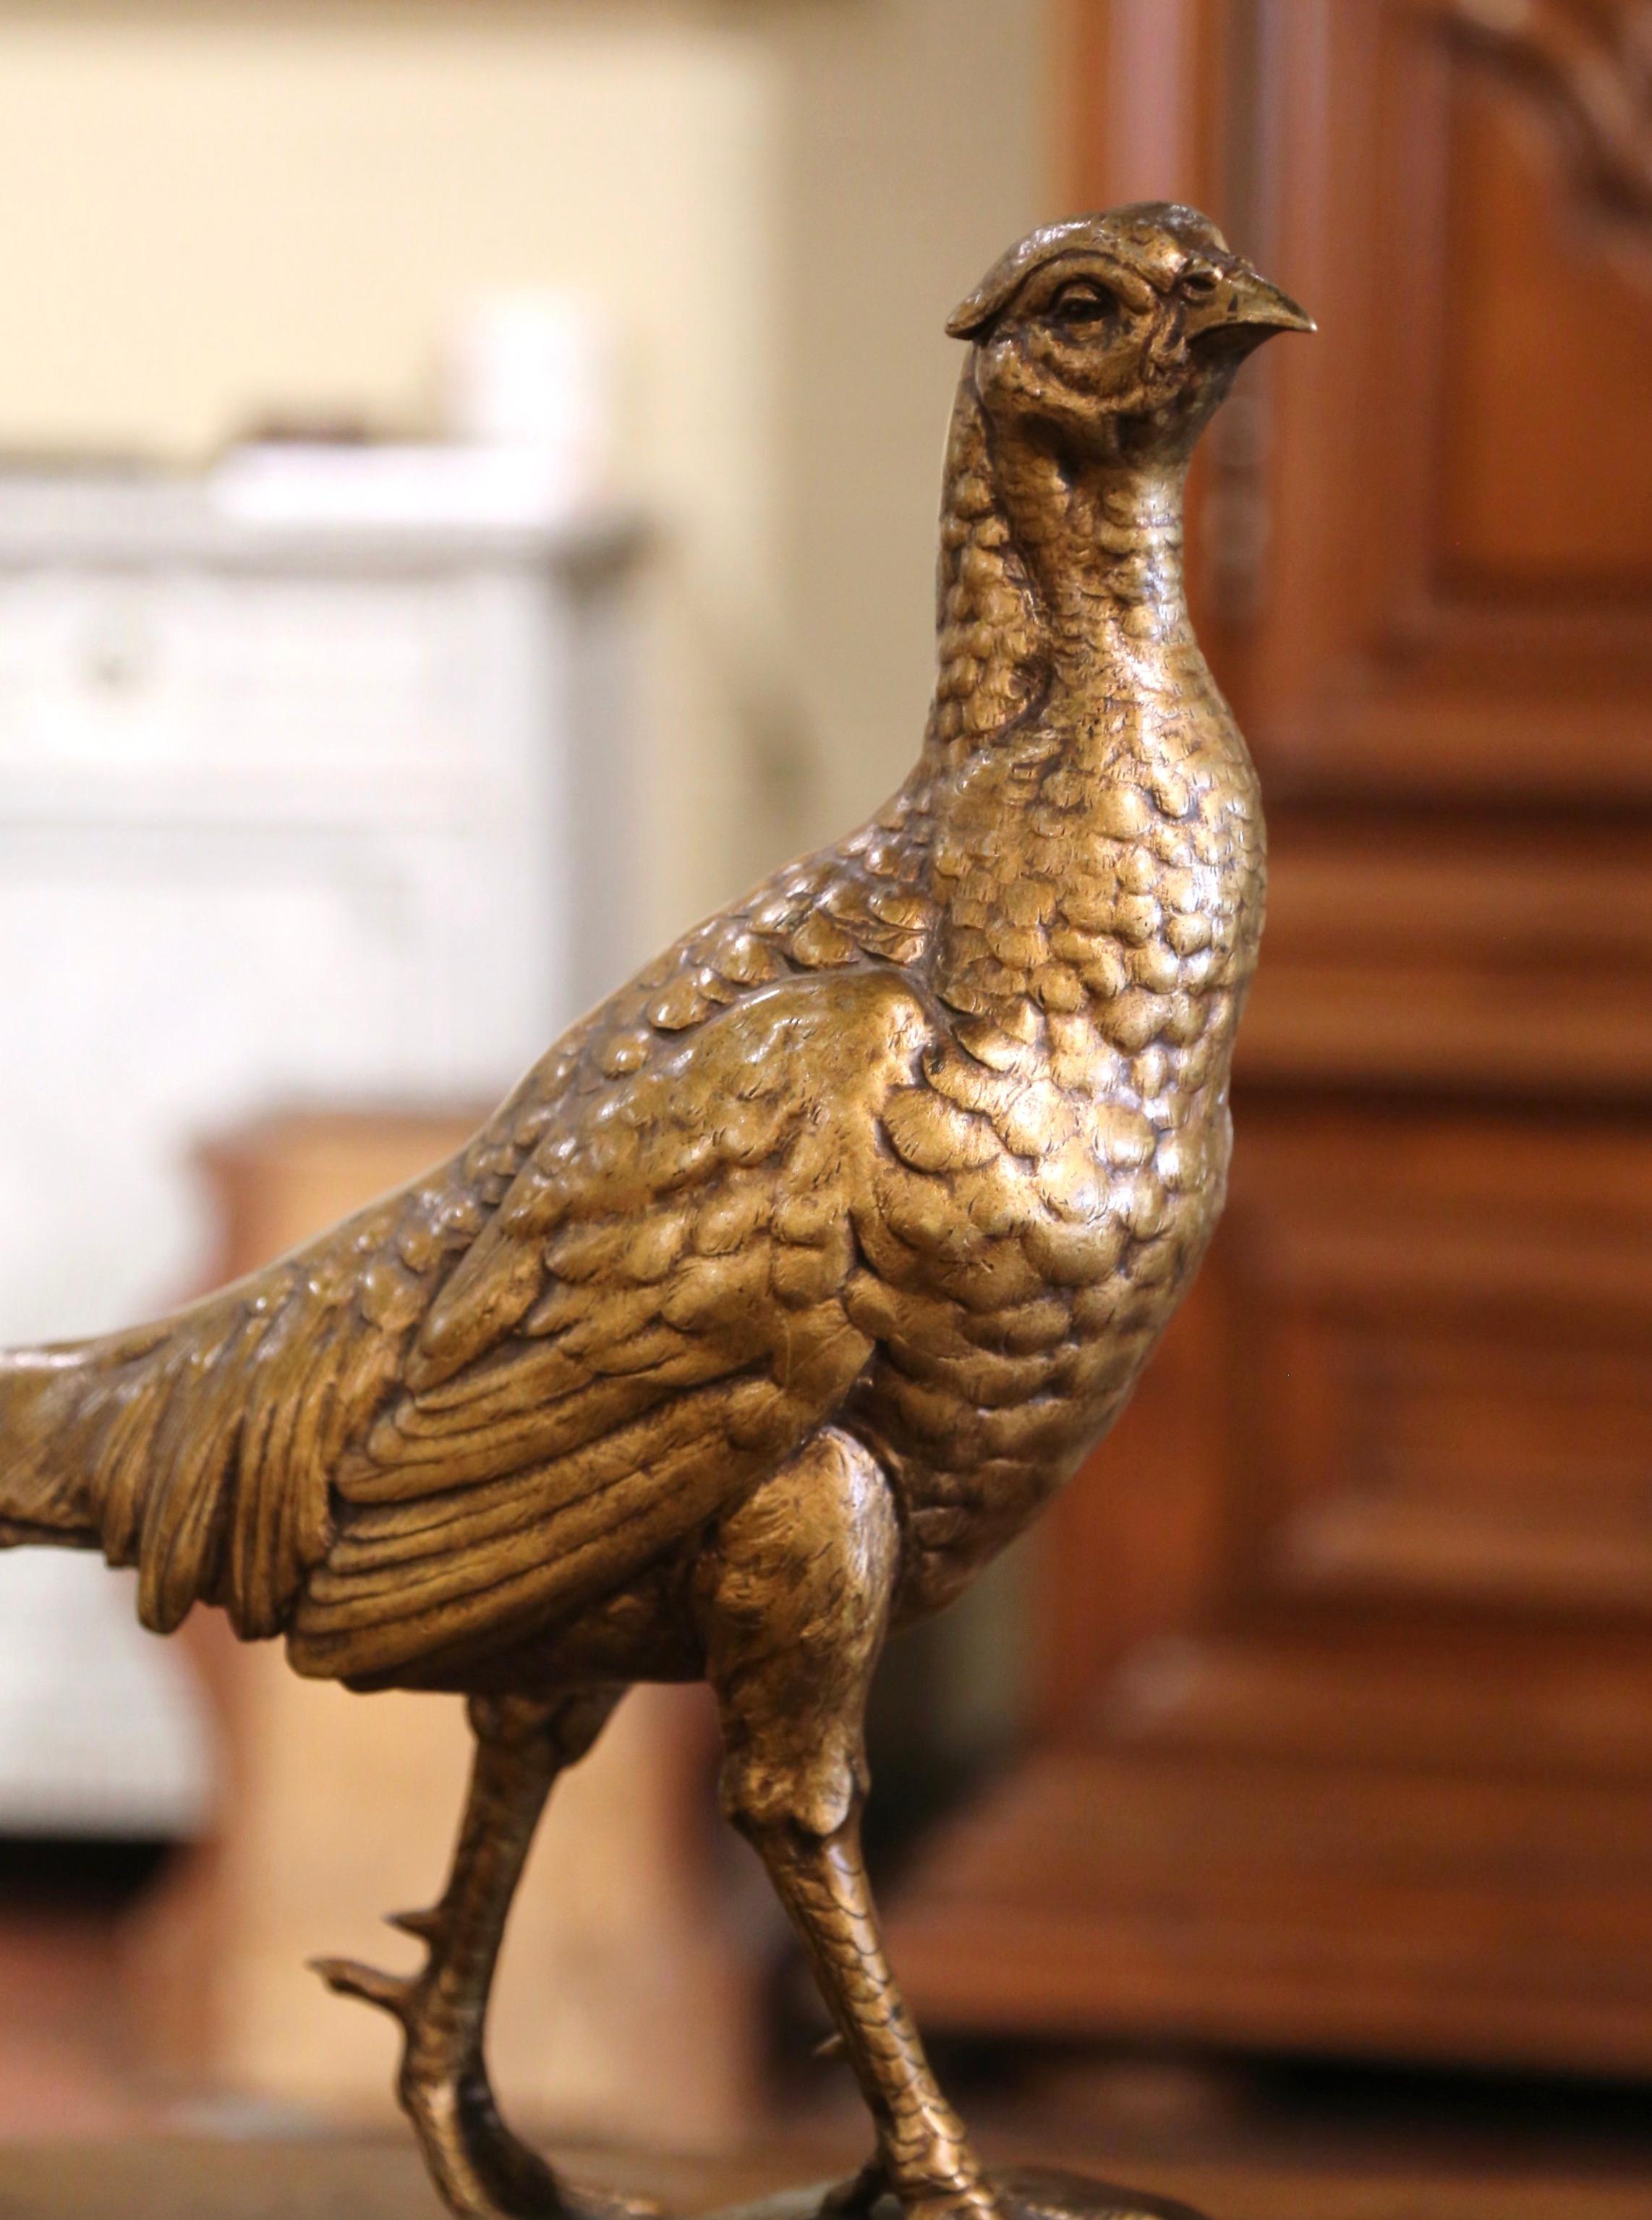 Accessorize a man's office or desk with this elegant antique bronze figure. Crafted in France circa 1895, the large sculpture features a pheasant with long tail standing on rocky grounds; the artwork is signed on the base by French artist J. E.